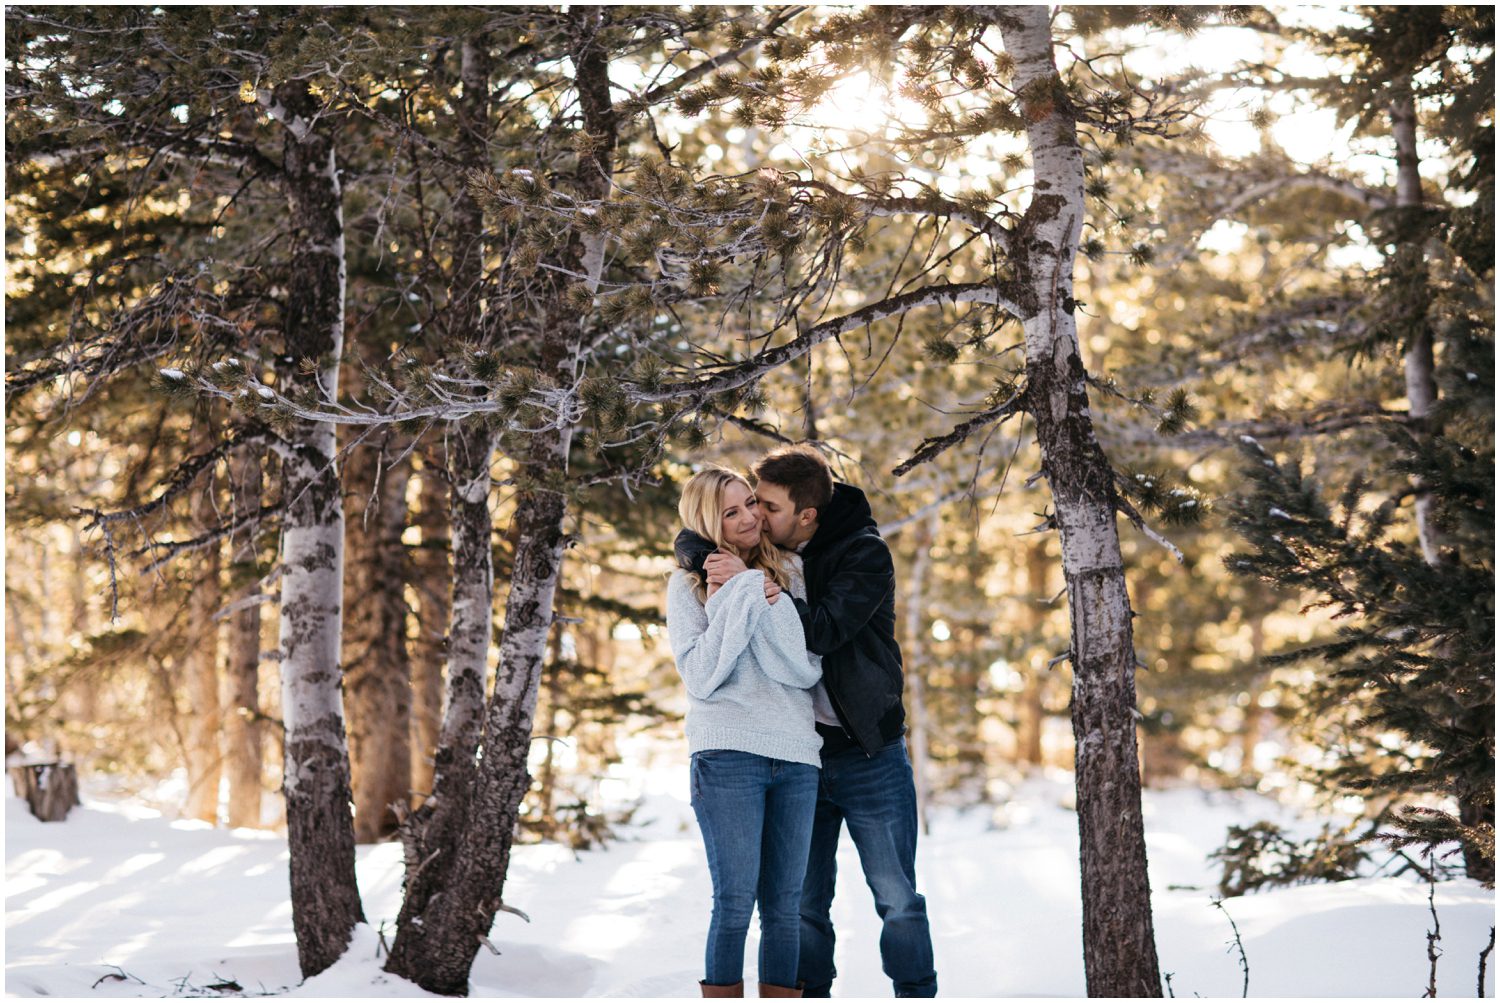 Engagement Session at Brainard Lake in Boulder Colorado  , Boulder Colorado Photographer, Boulder Wedding Photographer, Boulder engagement photographer, Boulder engagement photos, Engagement session locations in Boulder, Colorado winter engagement session, Winter engagement photos, Mountain engagement session, Snowy engagement photos, Engagement photos with dogs, Save the date, Save the data photo ideas, Photo session with dogs, St Bernard, Brainard Lake, Colorado, Boulder Colorado, Nederland Colorado, Ward Colorado, Colorado wedding, Colorado photographer